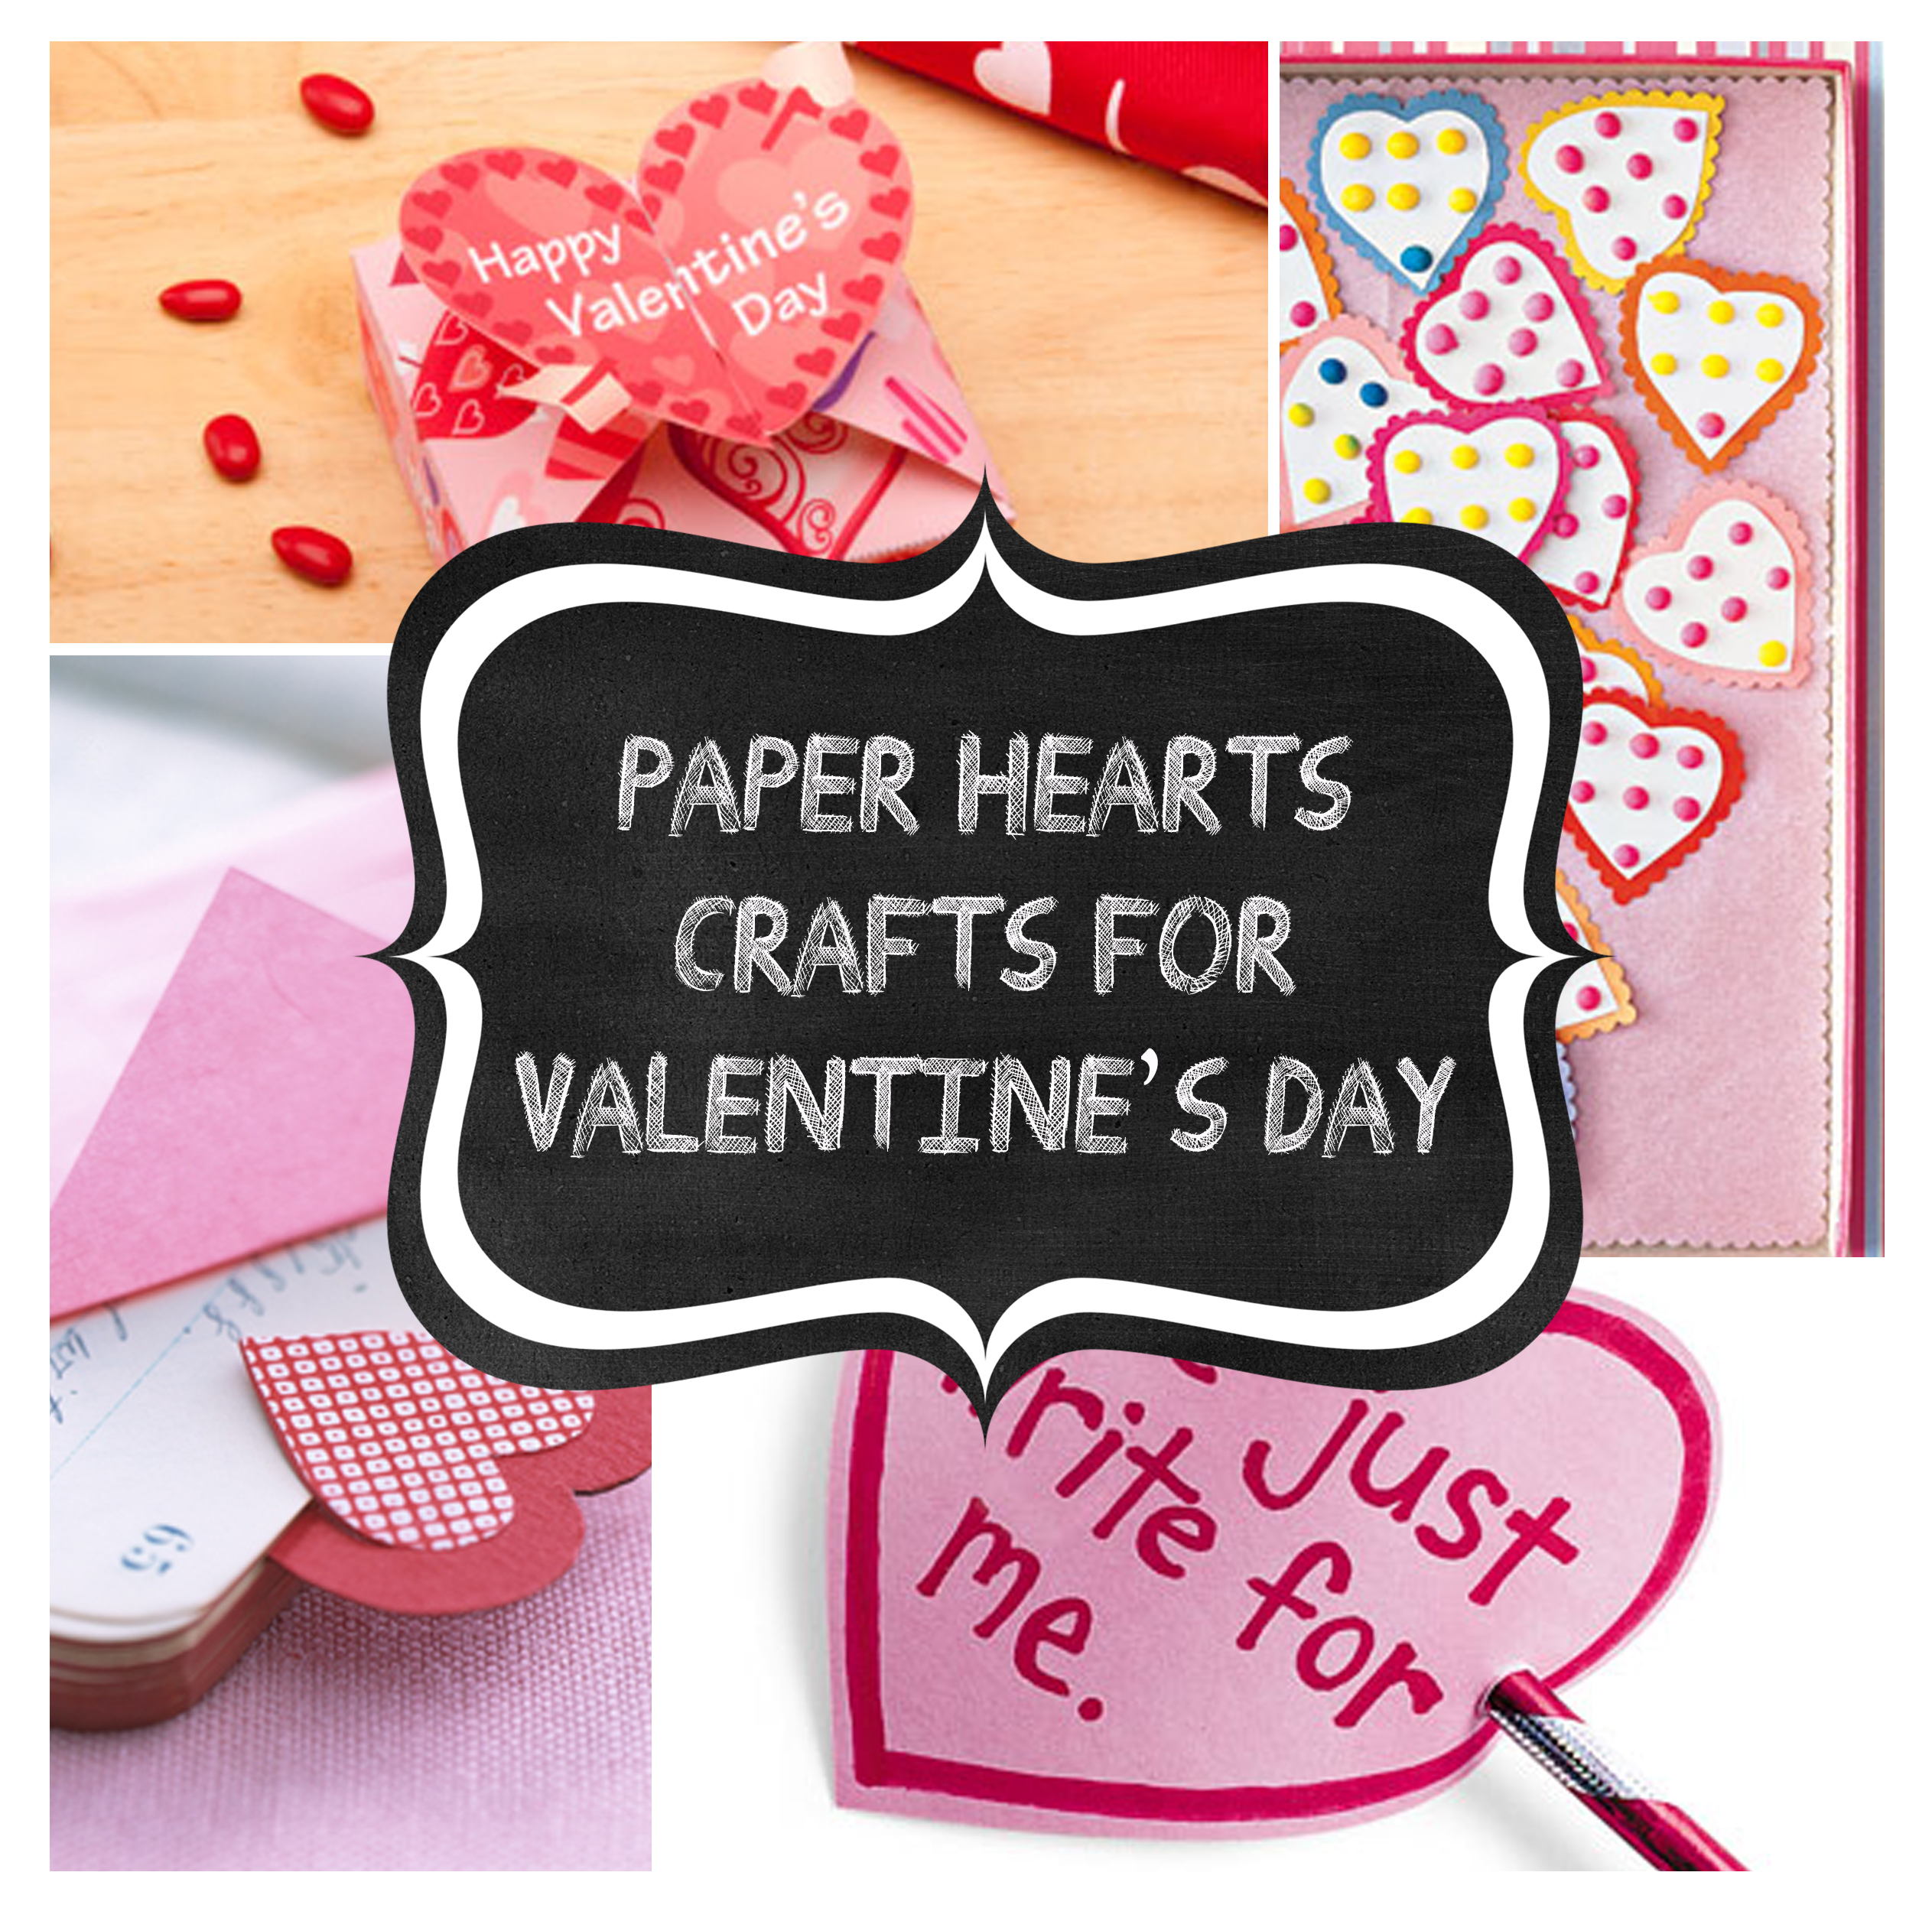 Paper Heart Crafts for Valentine’s Day